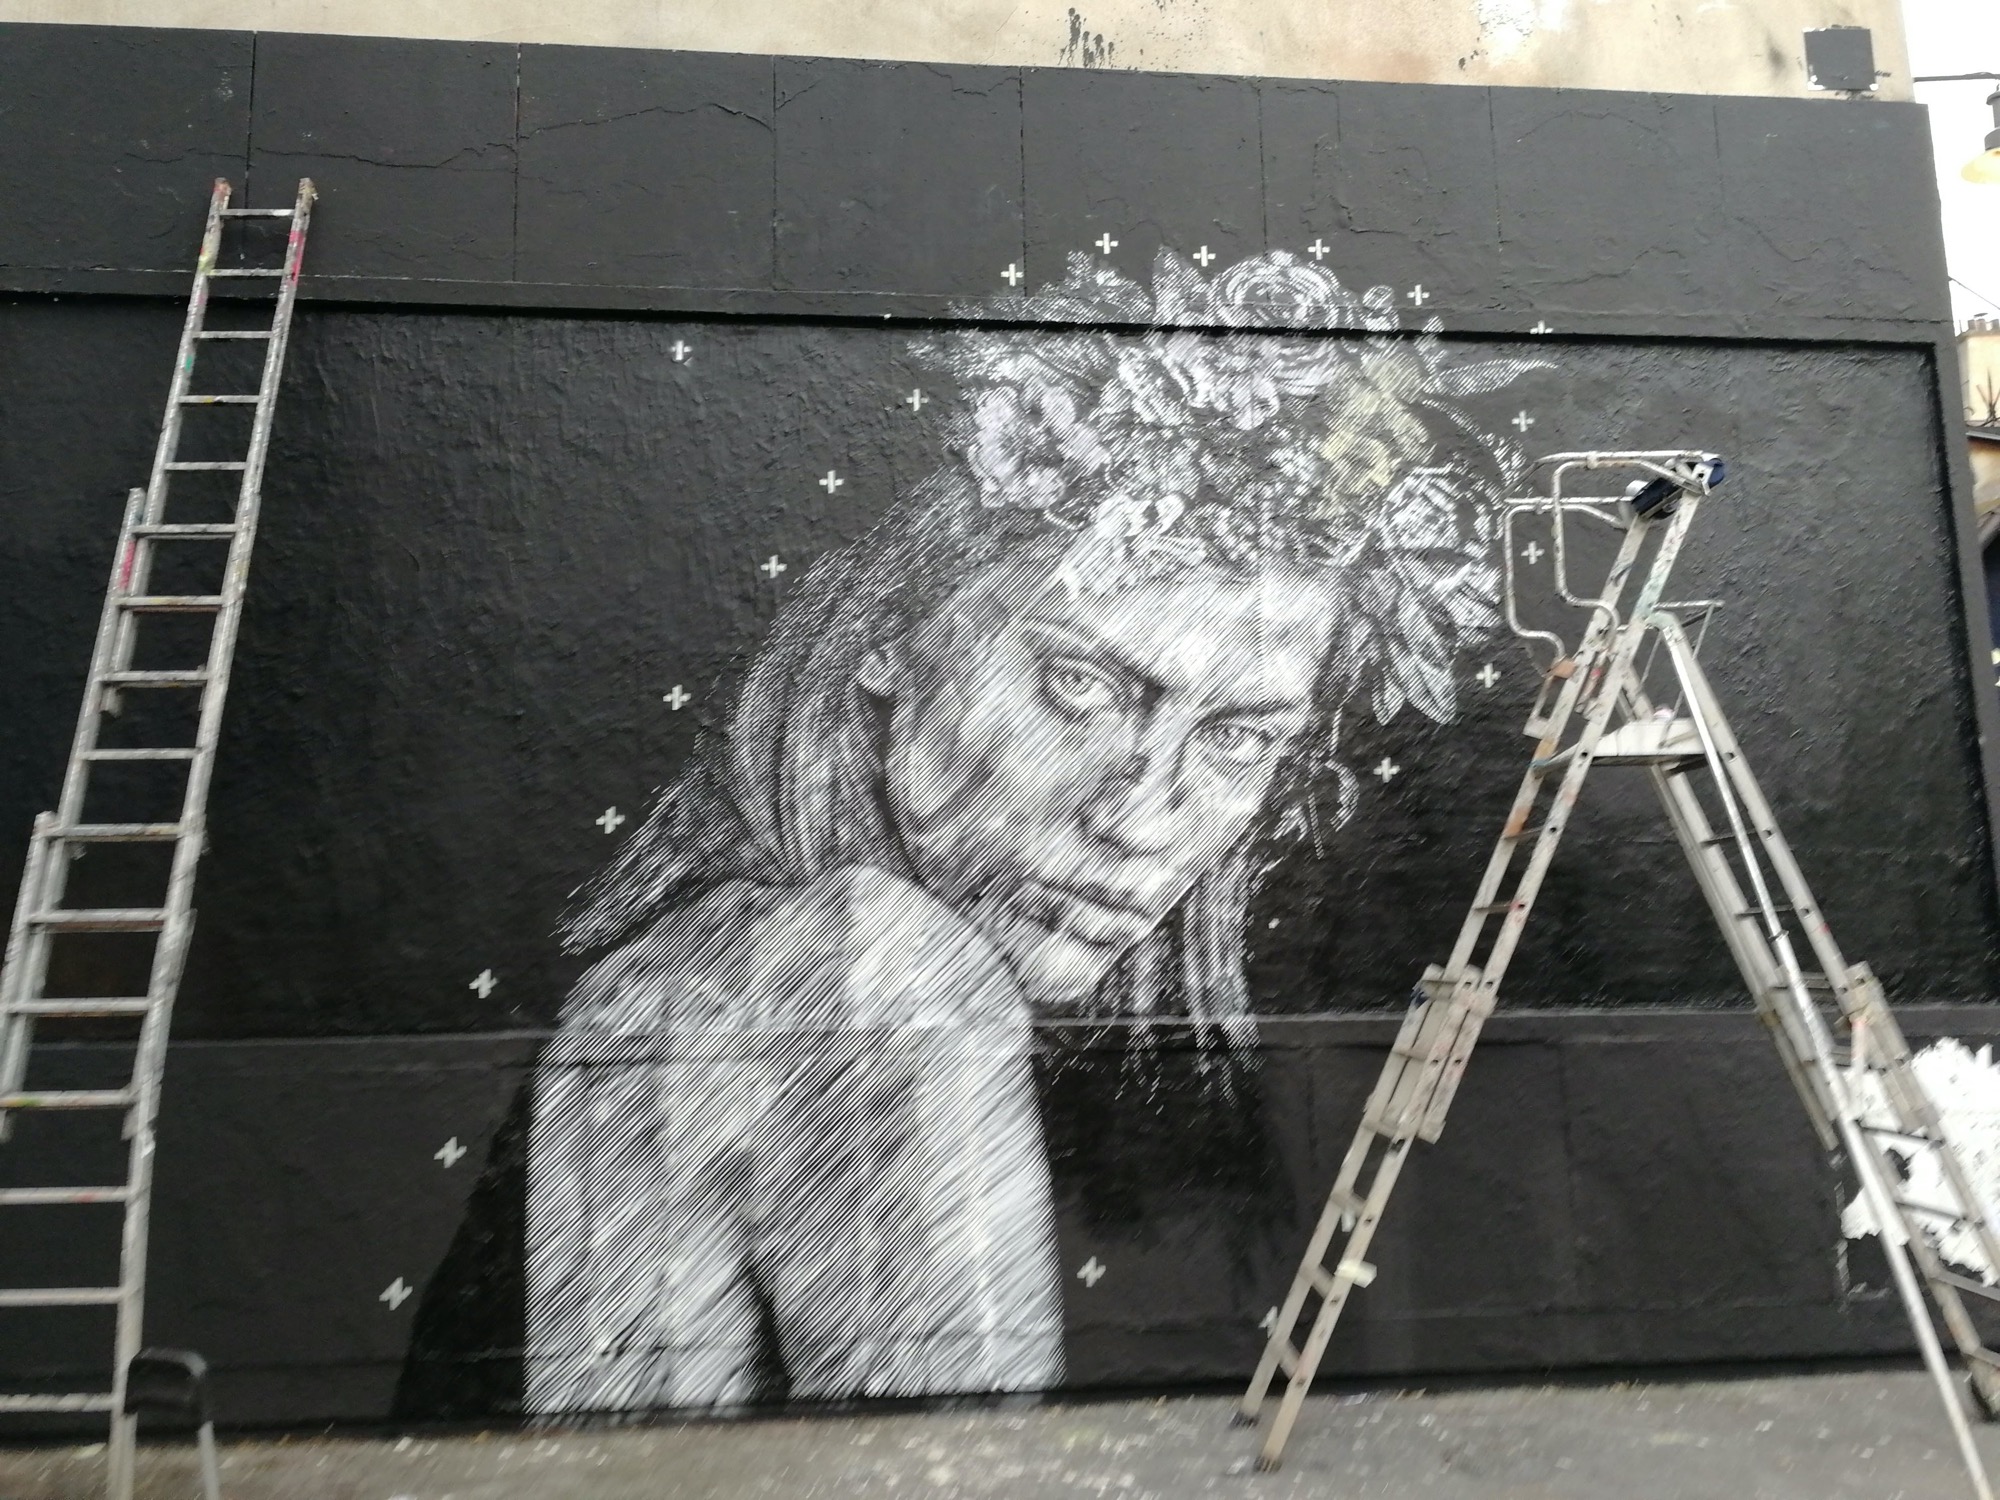 Graffiti 527 Ce matin-là by the artist Snik captured by Rabot in Paris France